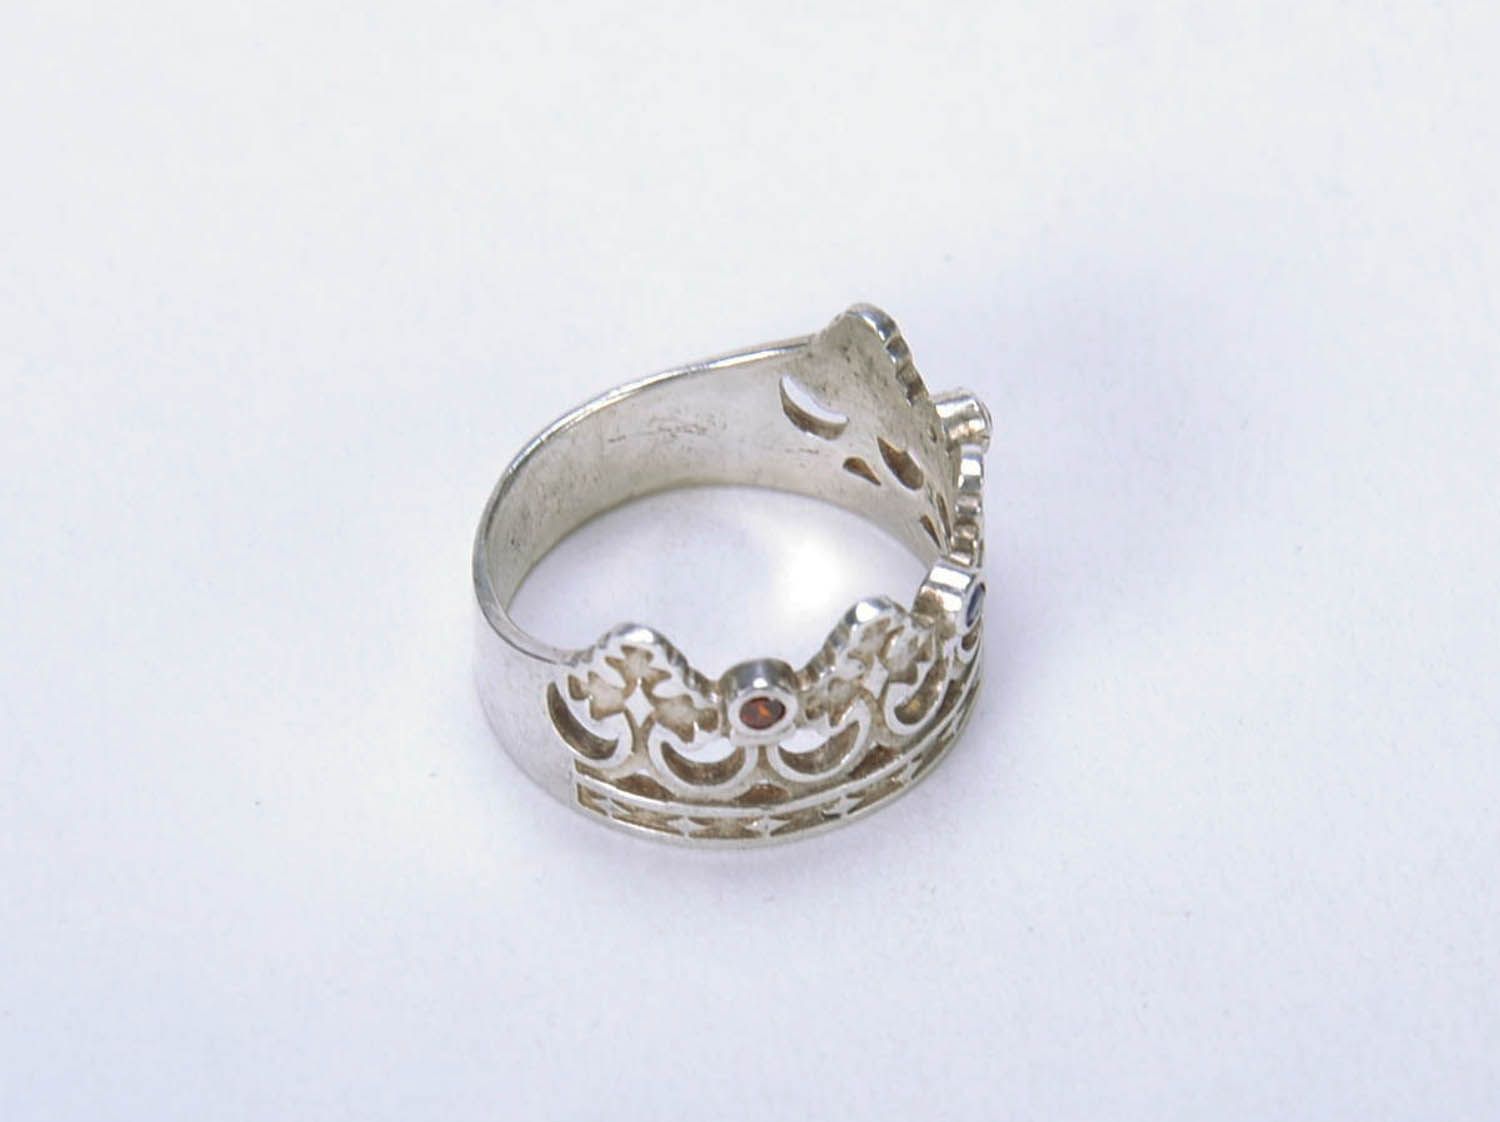 Homemade silver ring photo 4